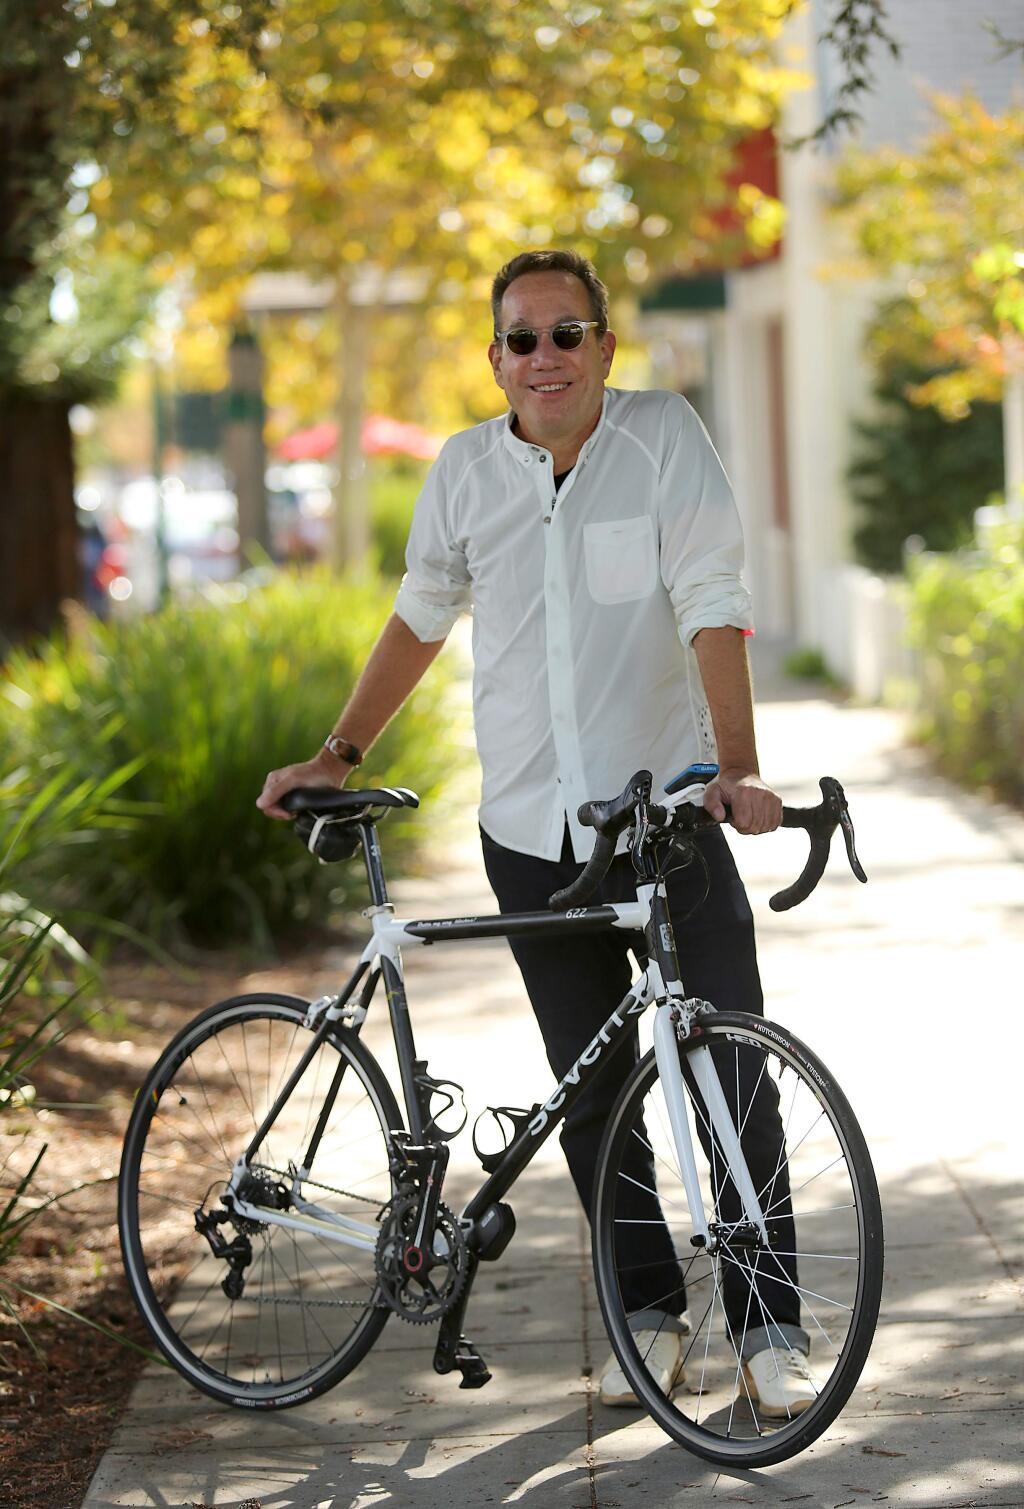 Roy Parvin, an author and avid cyclist, is helping raise money to get unique art pieces installed in downtown Cloverdale that are also bicycle racks. (Crista Jeremiason / The Press Democrat)